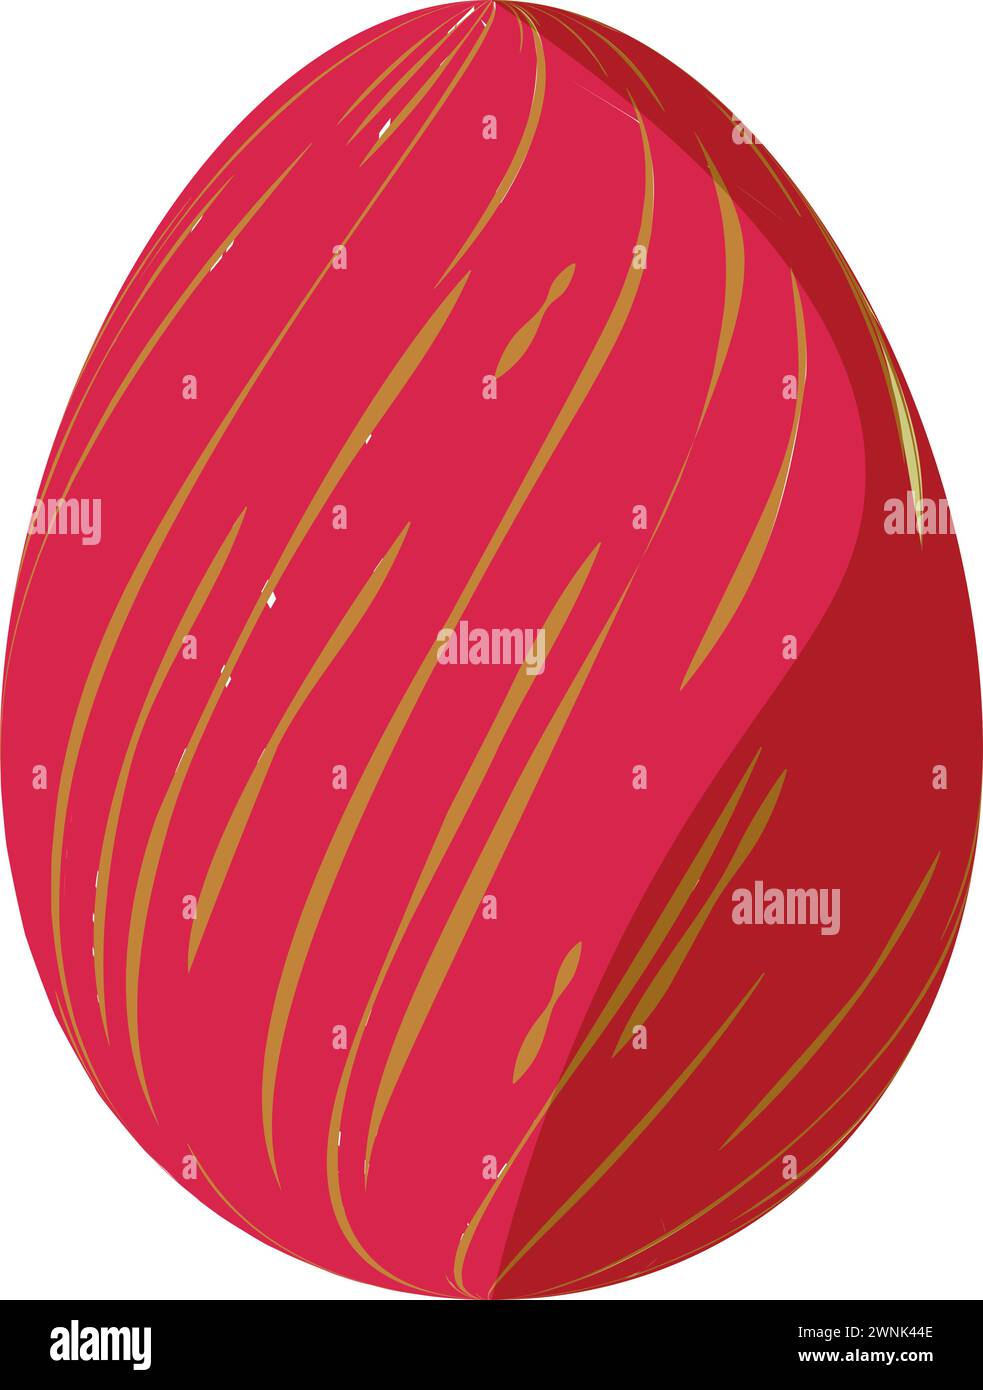 Realistic 3D egg decorated with striped textured effect in abstract style for Easter greeting card Stock Vector